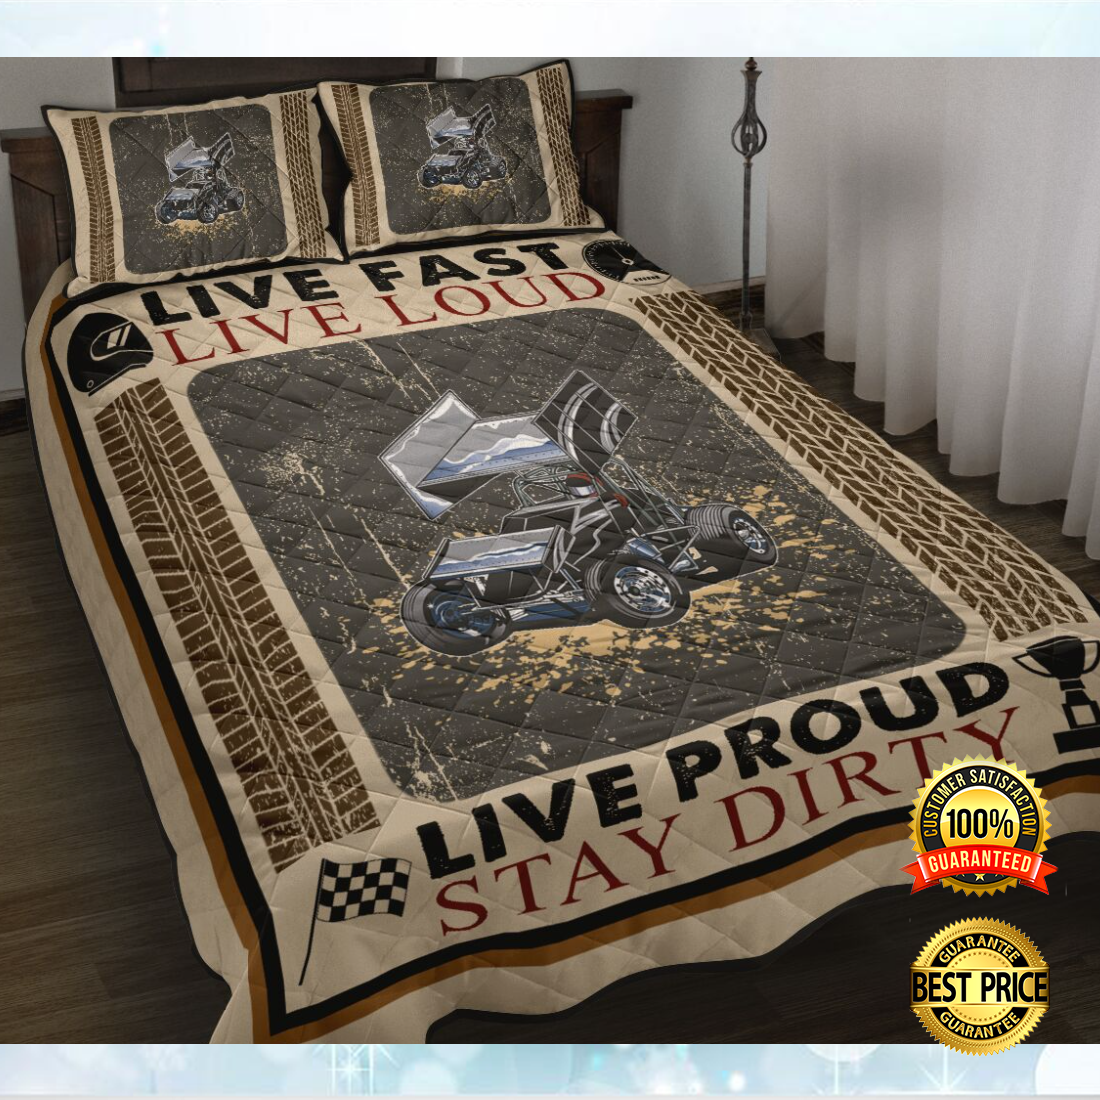 Live fast live loud live proud stay dirty bedding set 4